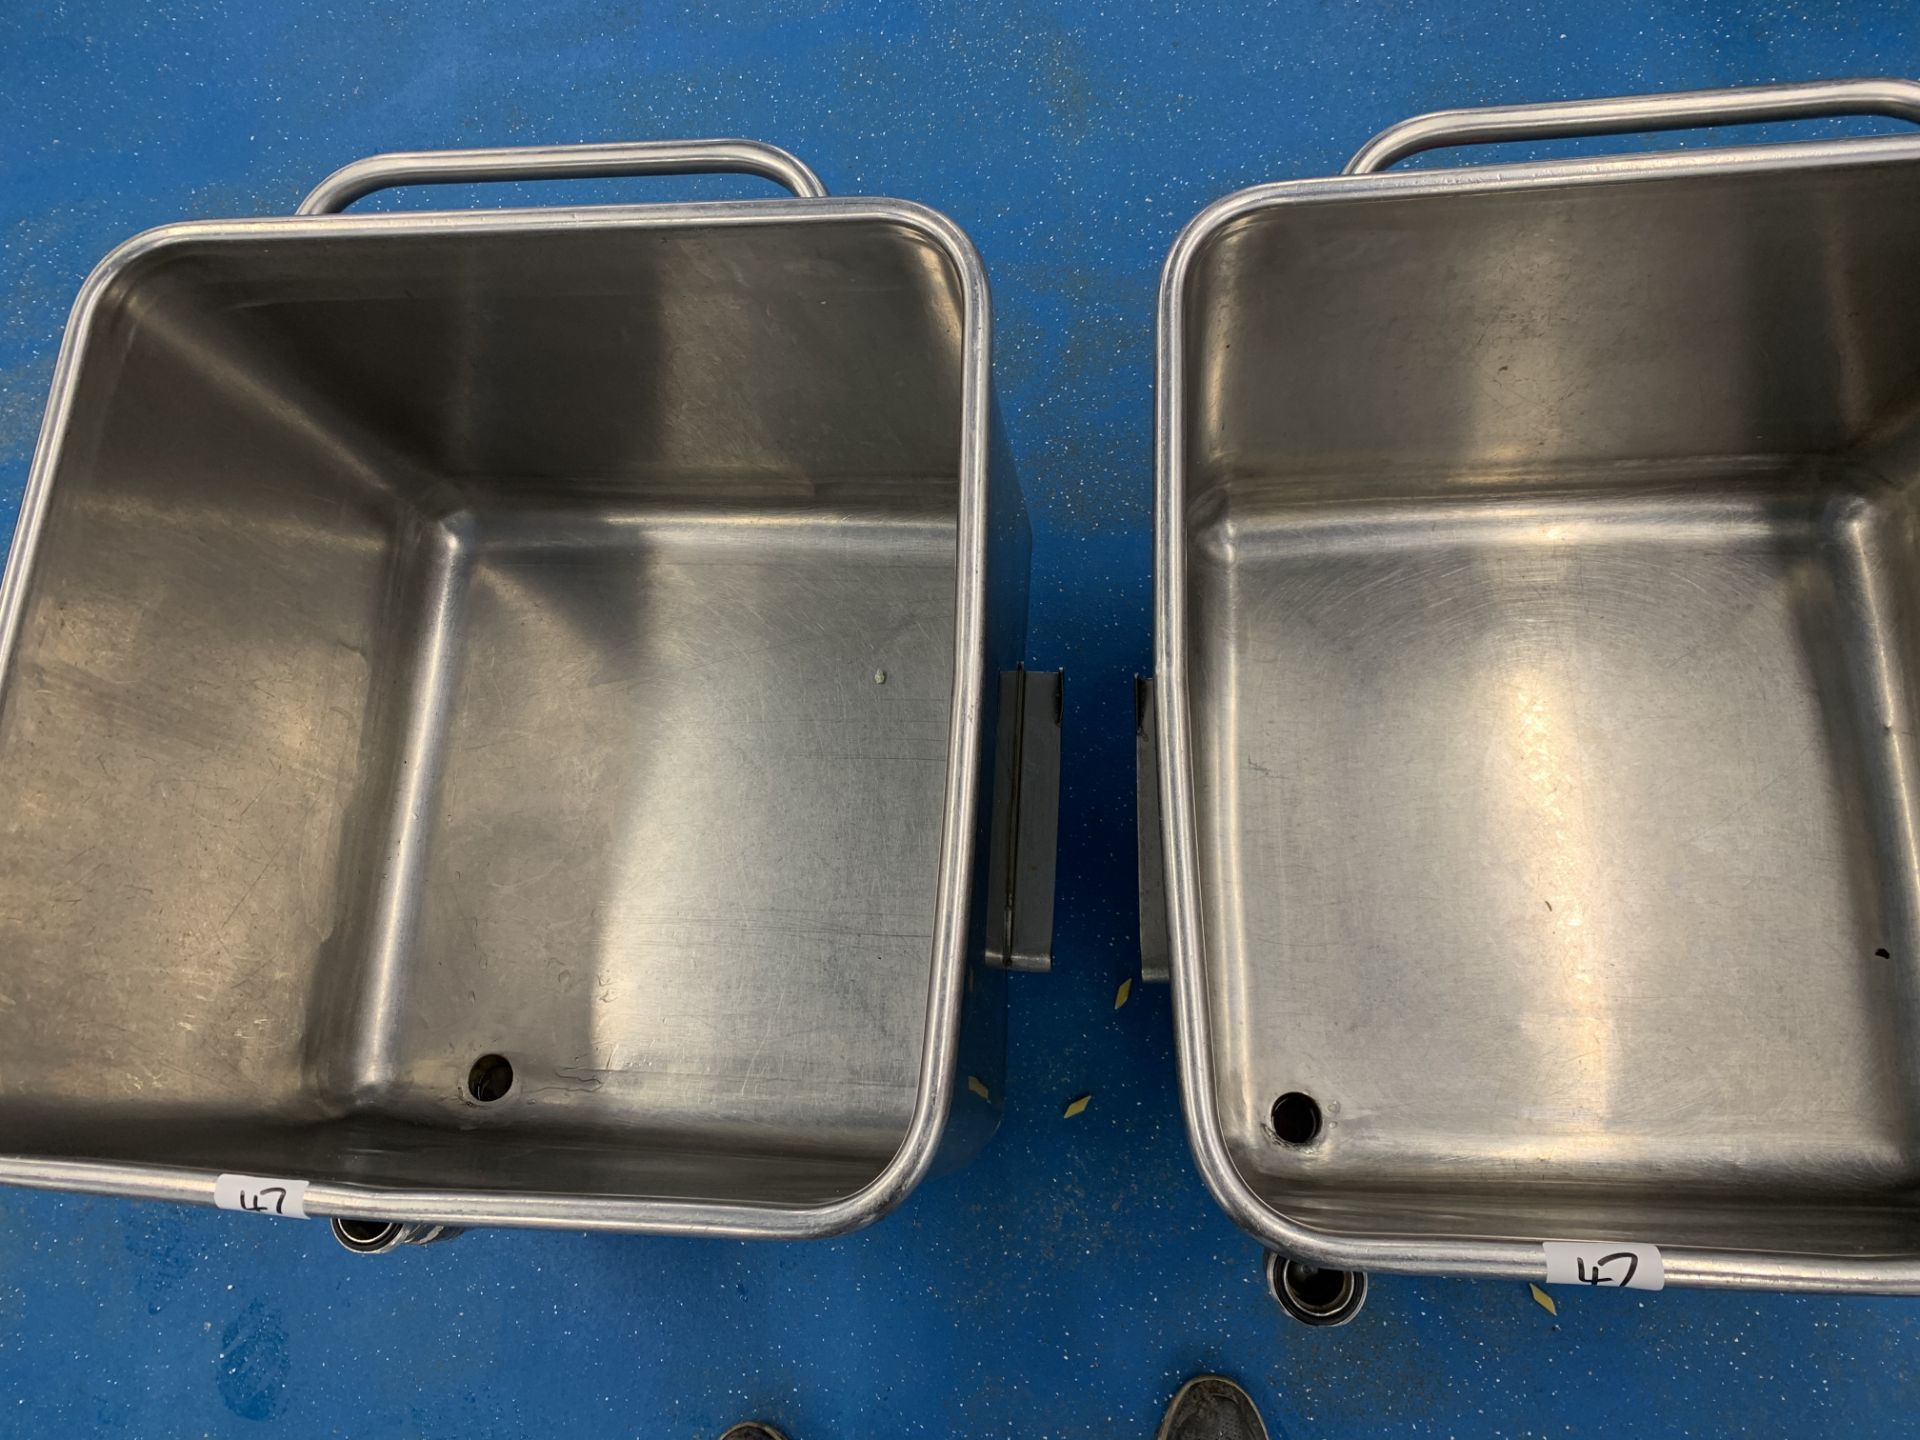 2 x Orbital stainless steel Tote Bins 670 x 670 x 50 mm fitted with drainer pipe - Image 2 of 3